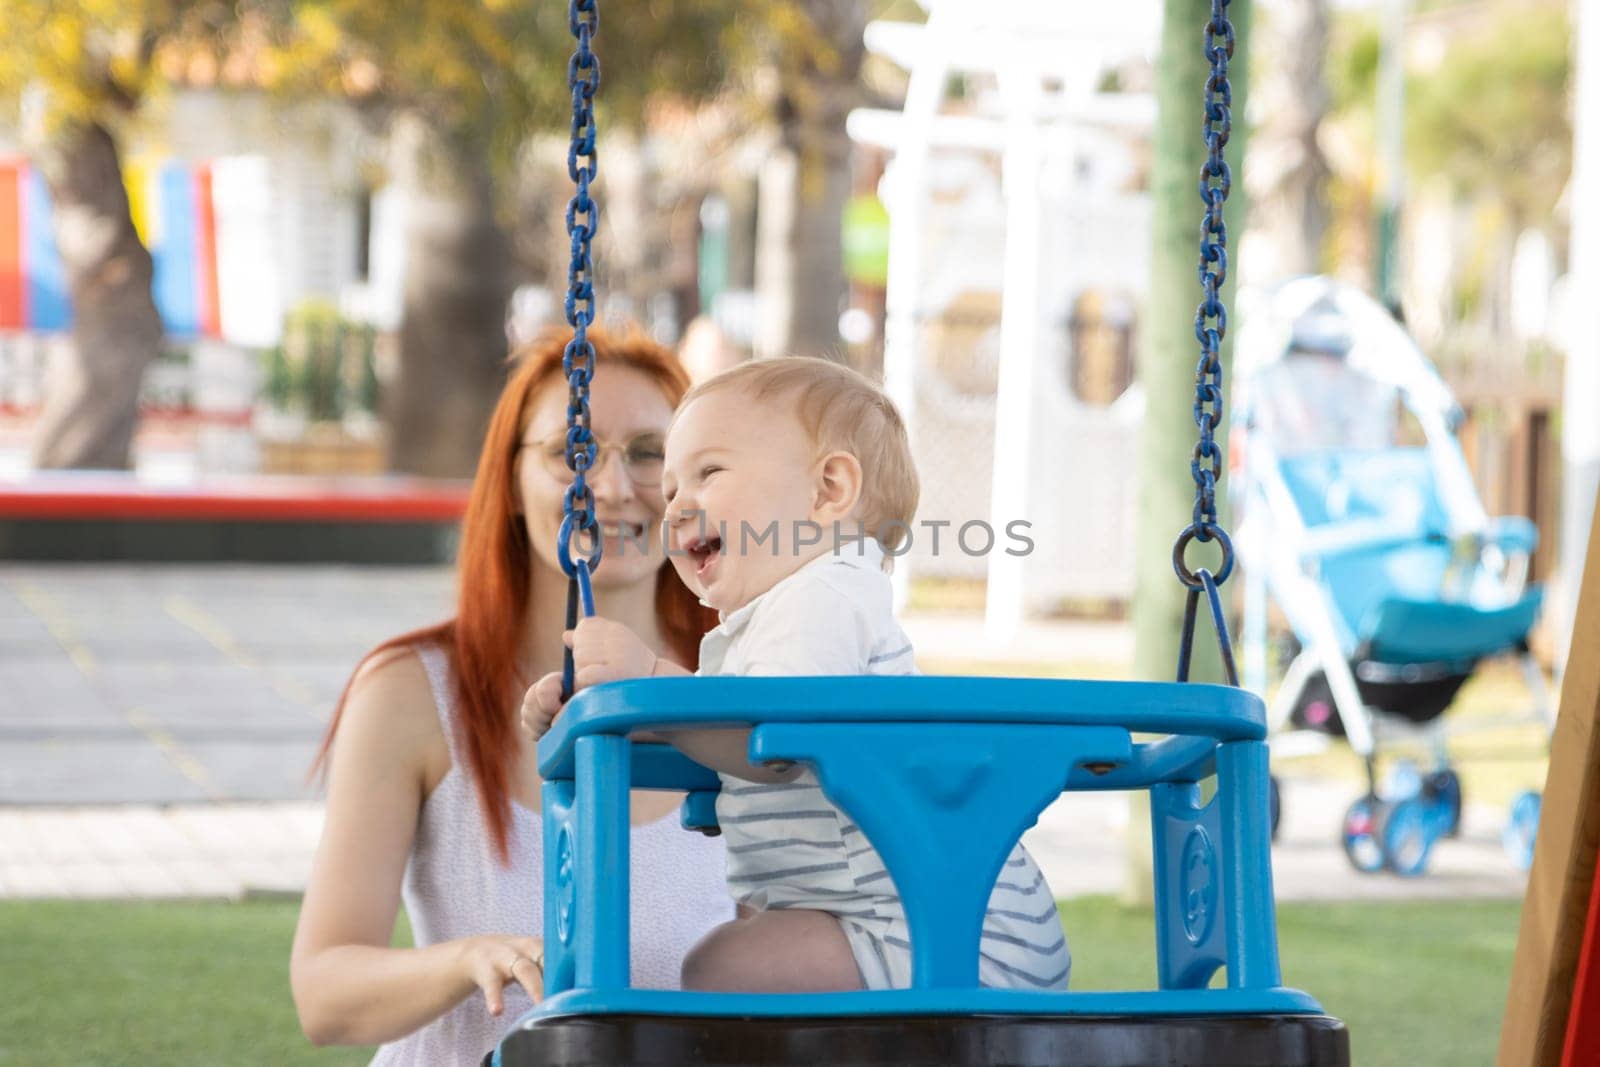 Happy family vacation - funny baby swings on swings in playground and his mom sits near him. Mid shot